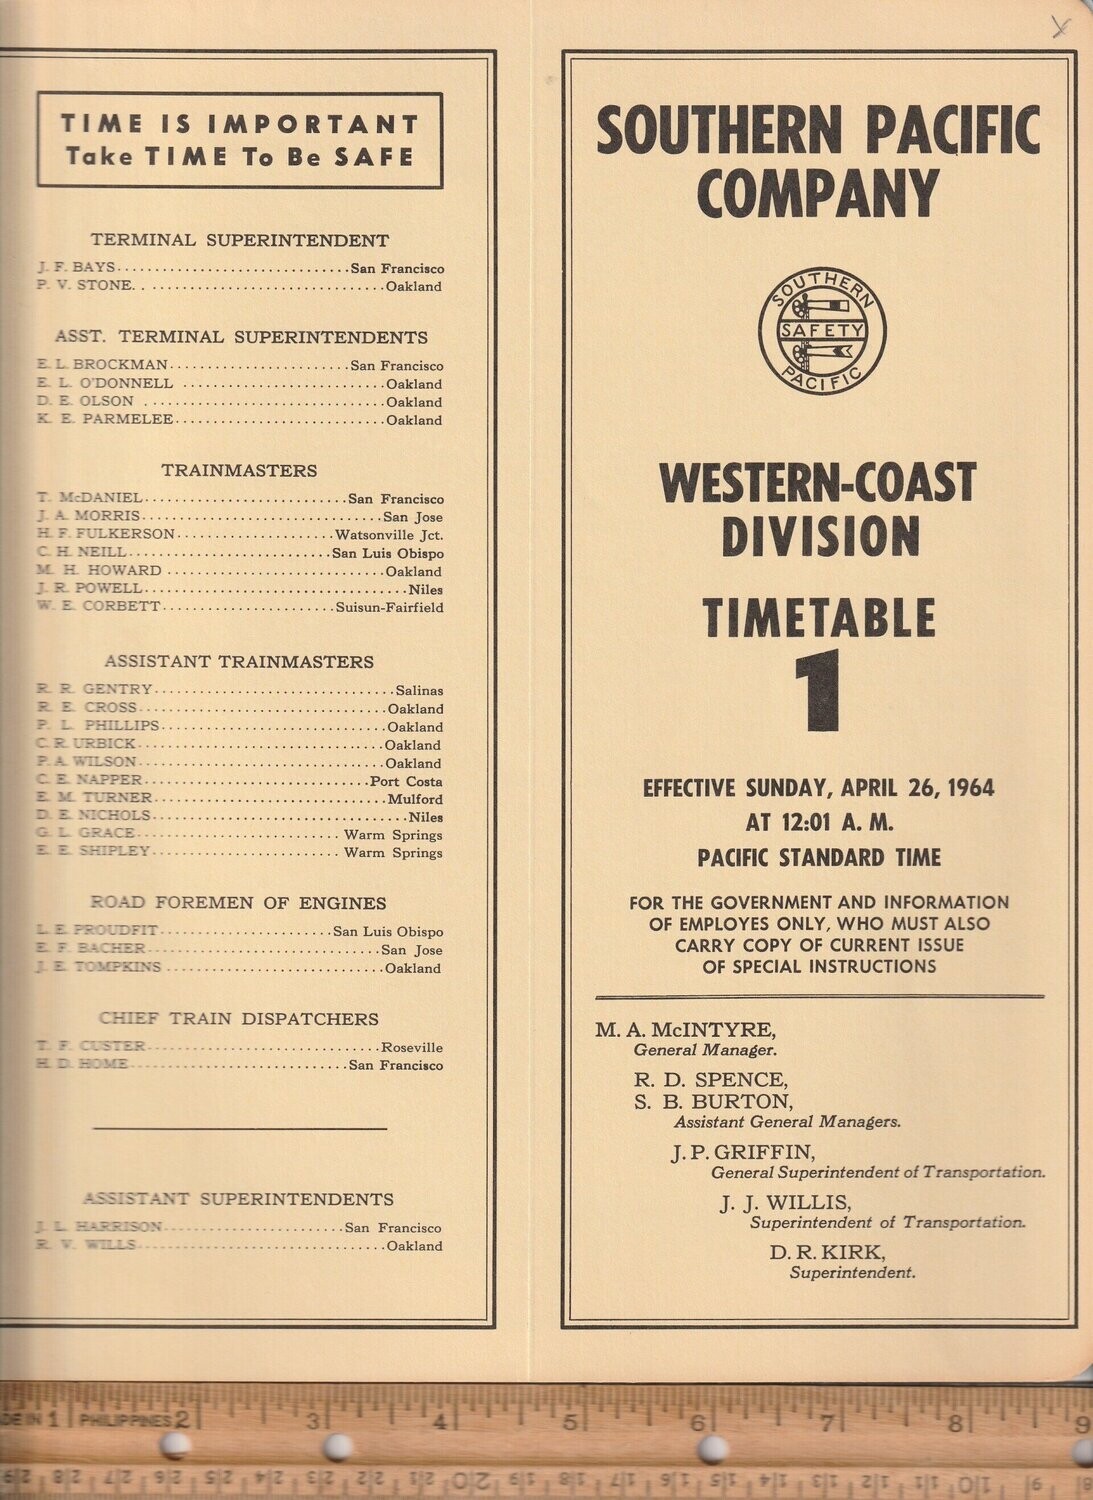 Southern Pacific Western-Coast Division 1964